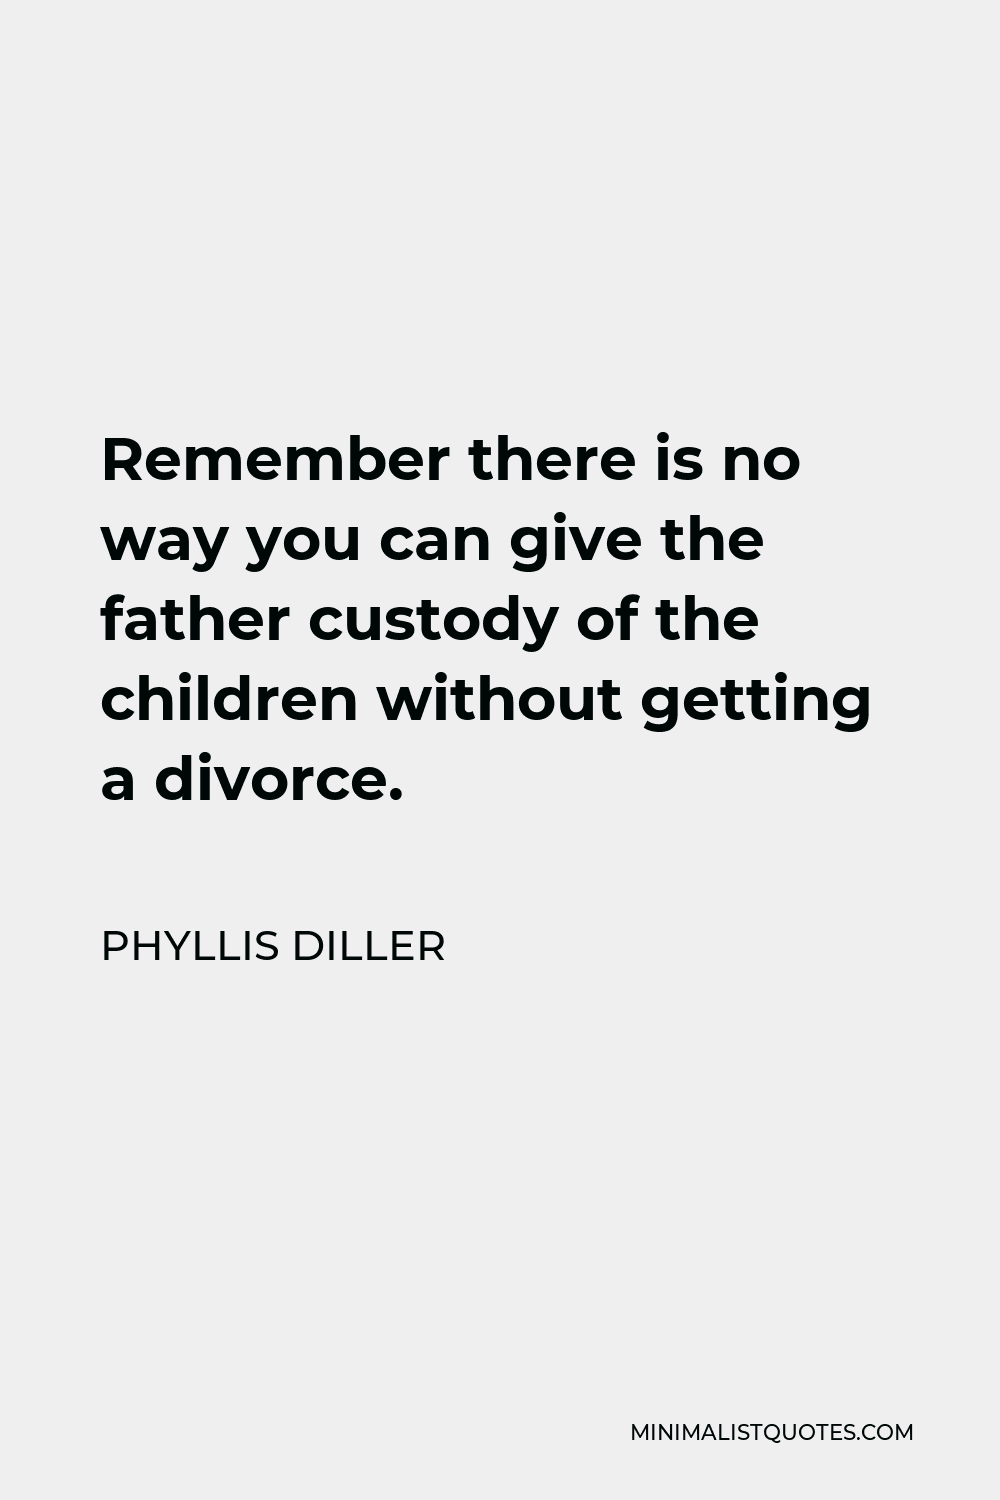 Phyllis Diller Quote - Remember there is no way you can give the father custody of the children without getting a divorce.